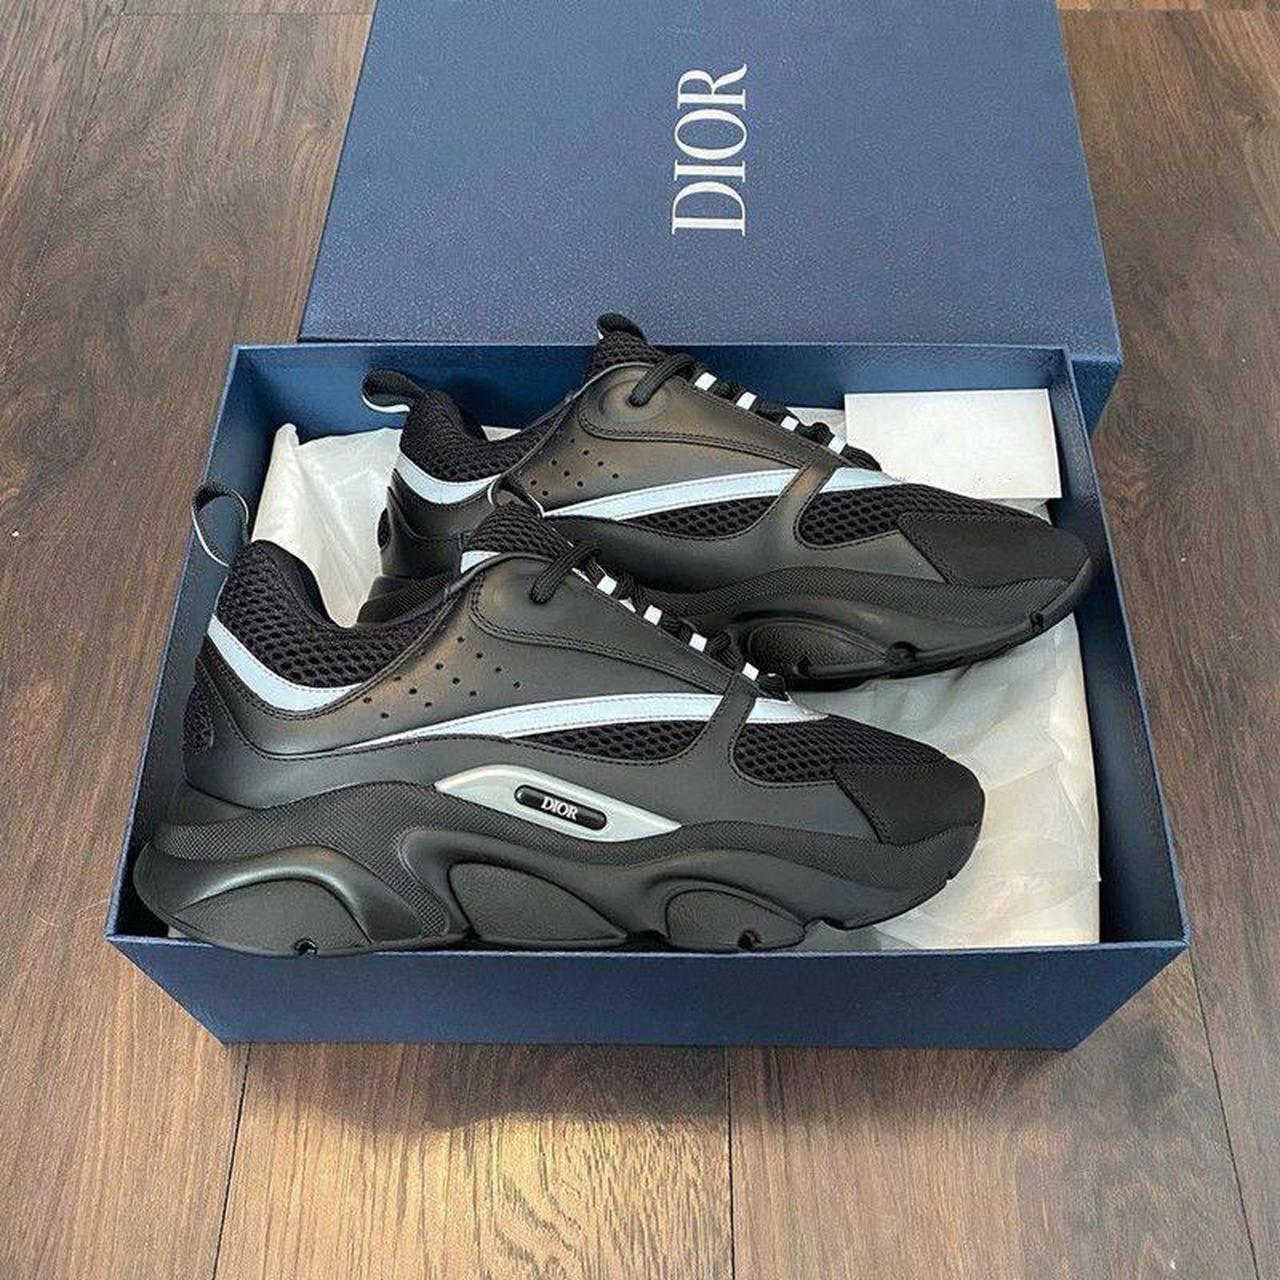 Dior b22 7-10 days delivery Message to order 🔥 - Depop